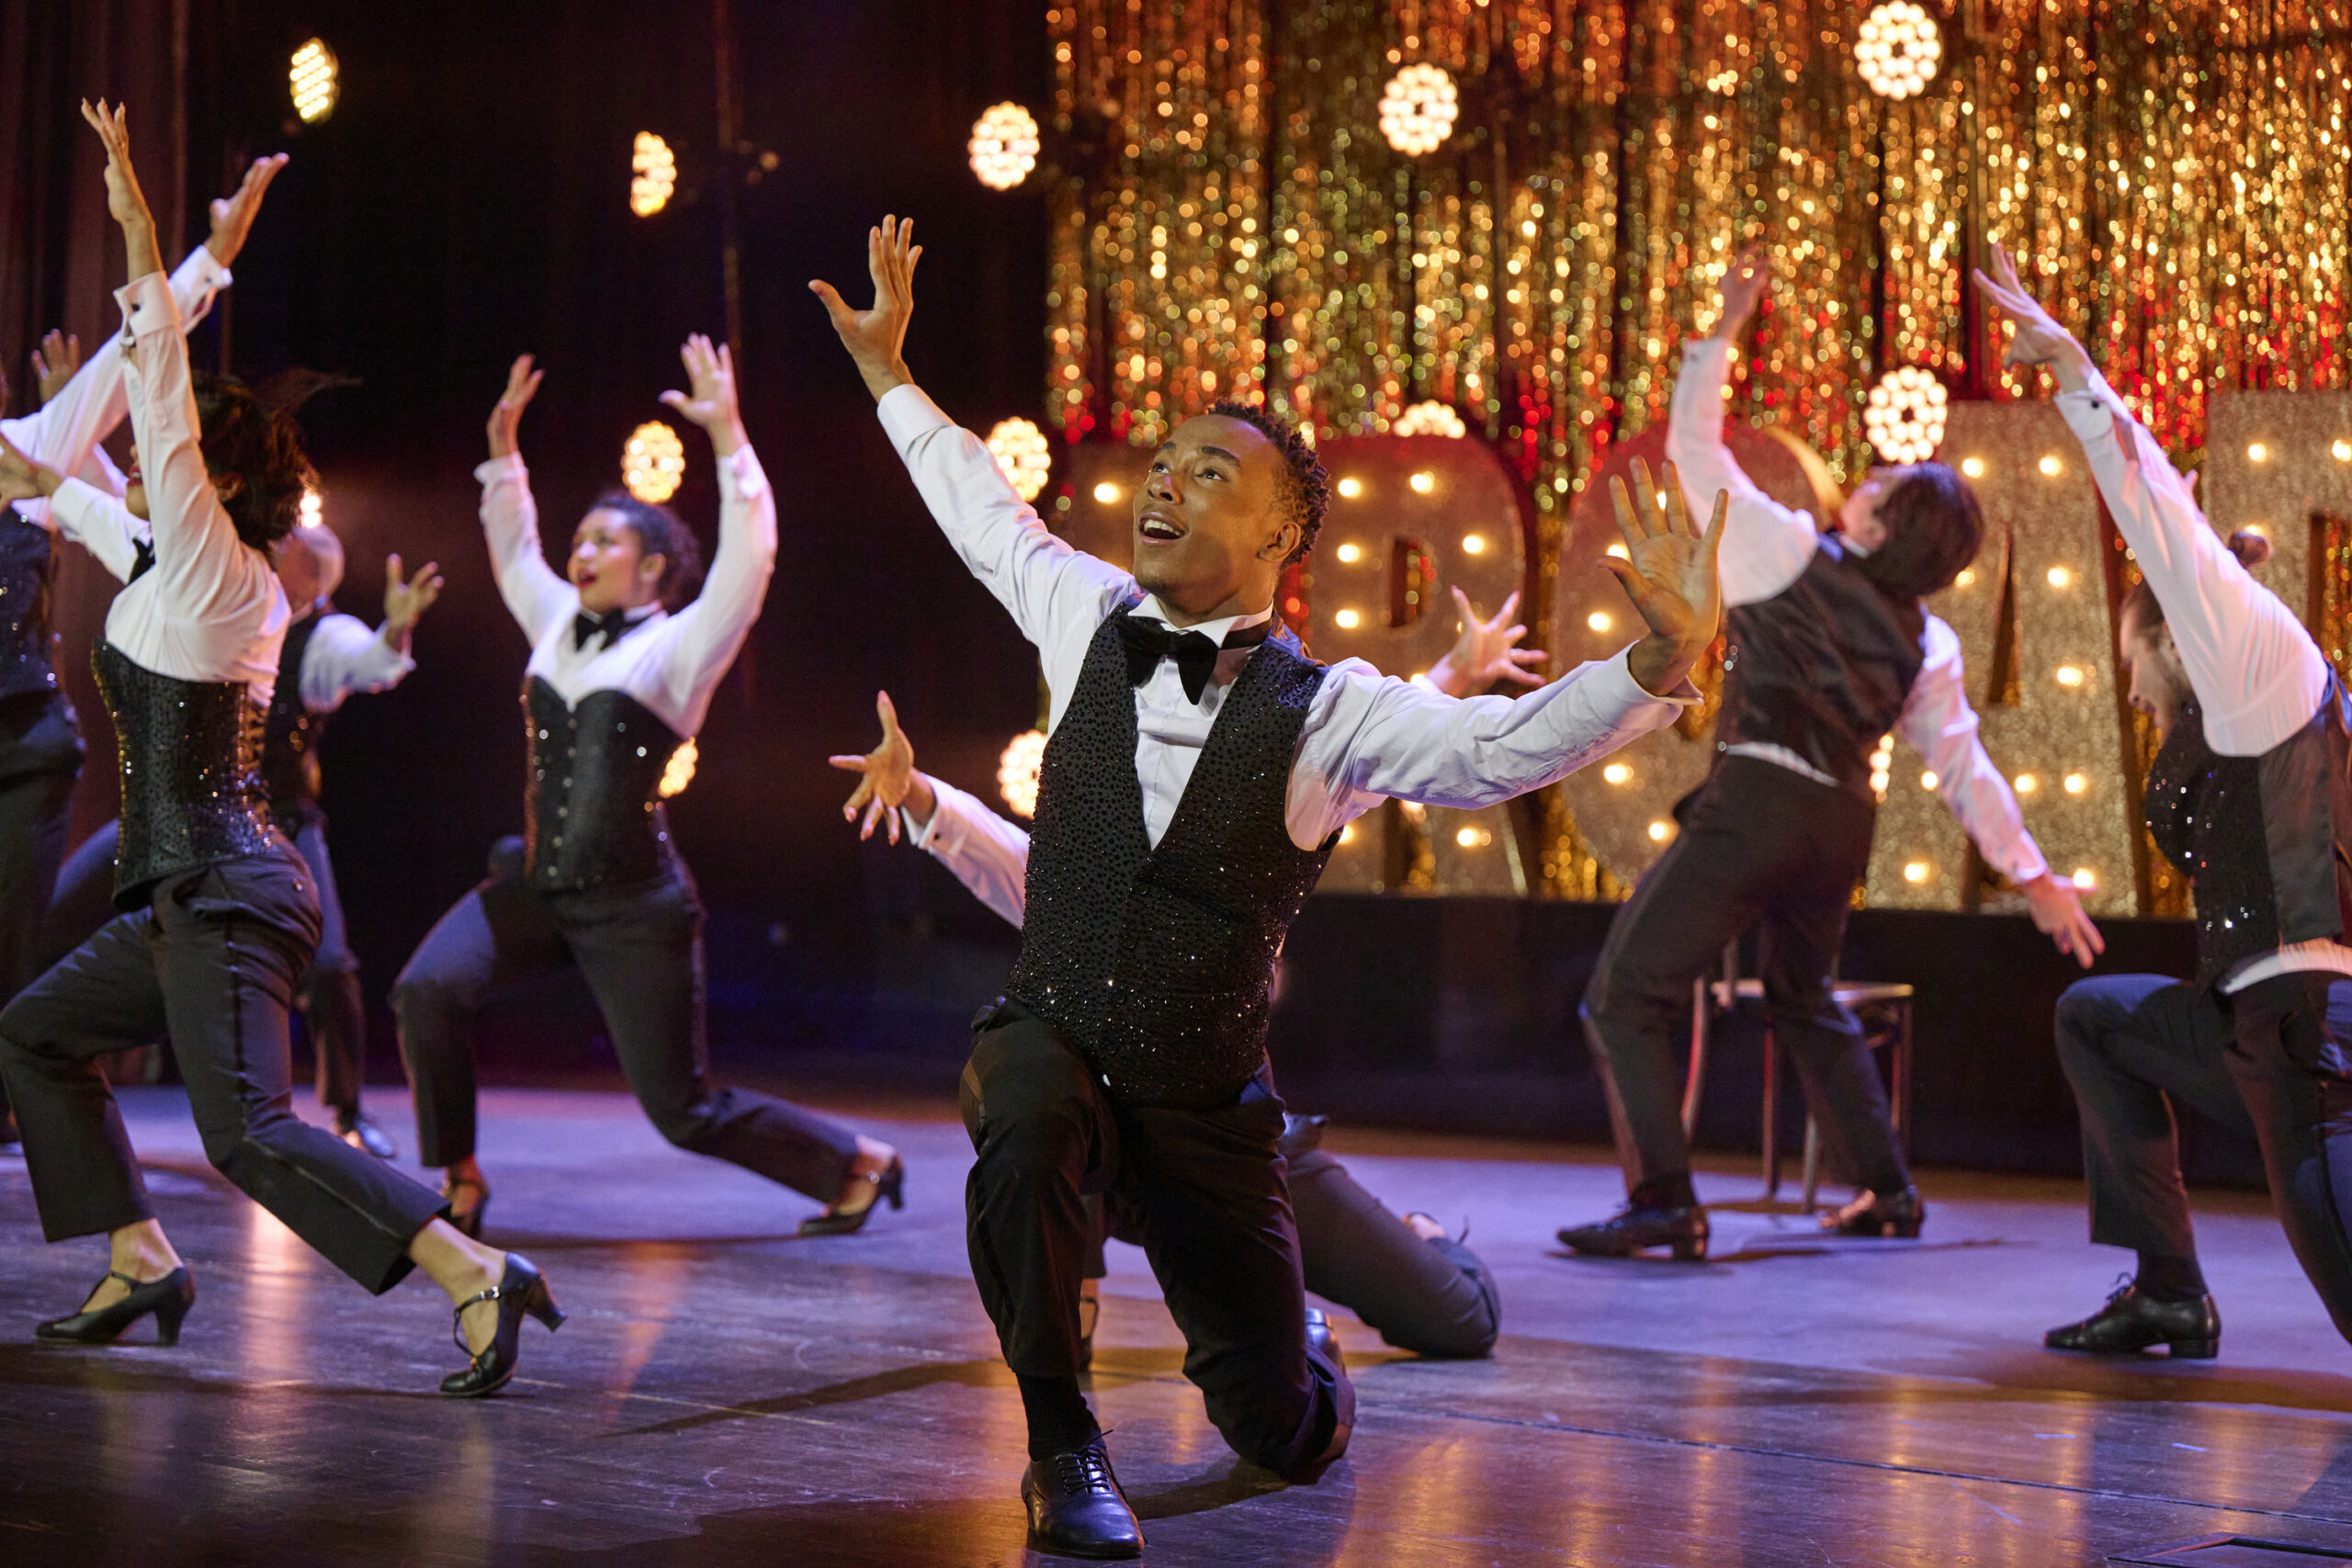 Against a glittery gold backdrop, the 8 remaining "SYTYCD" competitors, wearing glammed-up tuxedos, are caught mid-performance, their arms raised, hopeful expressions on their faces.